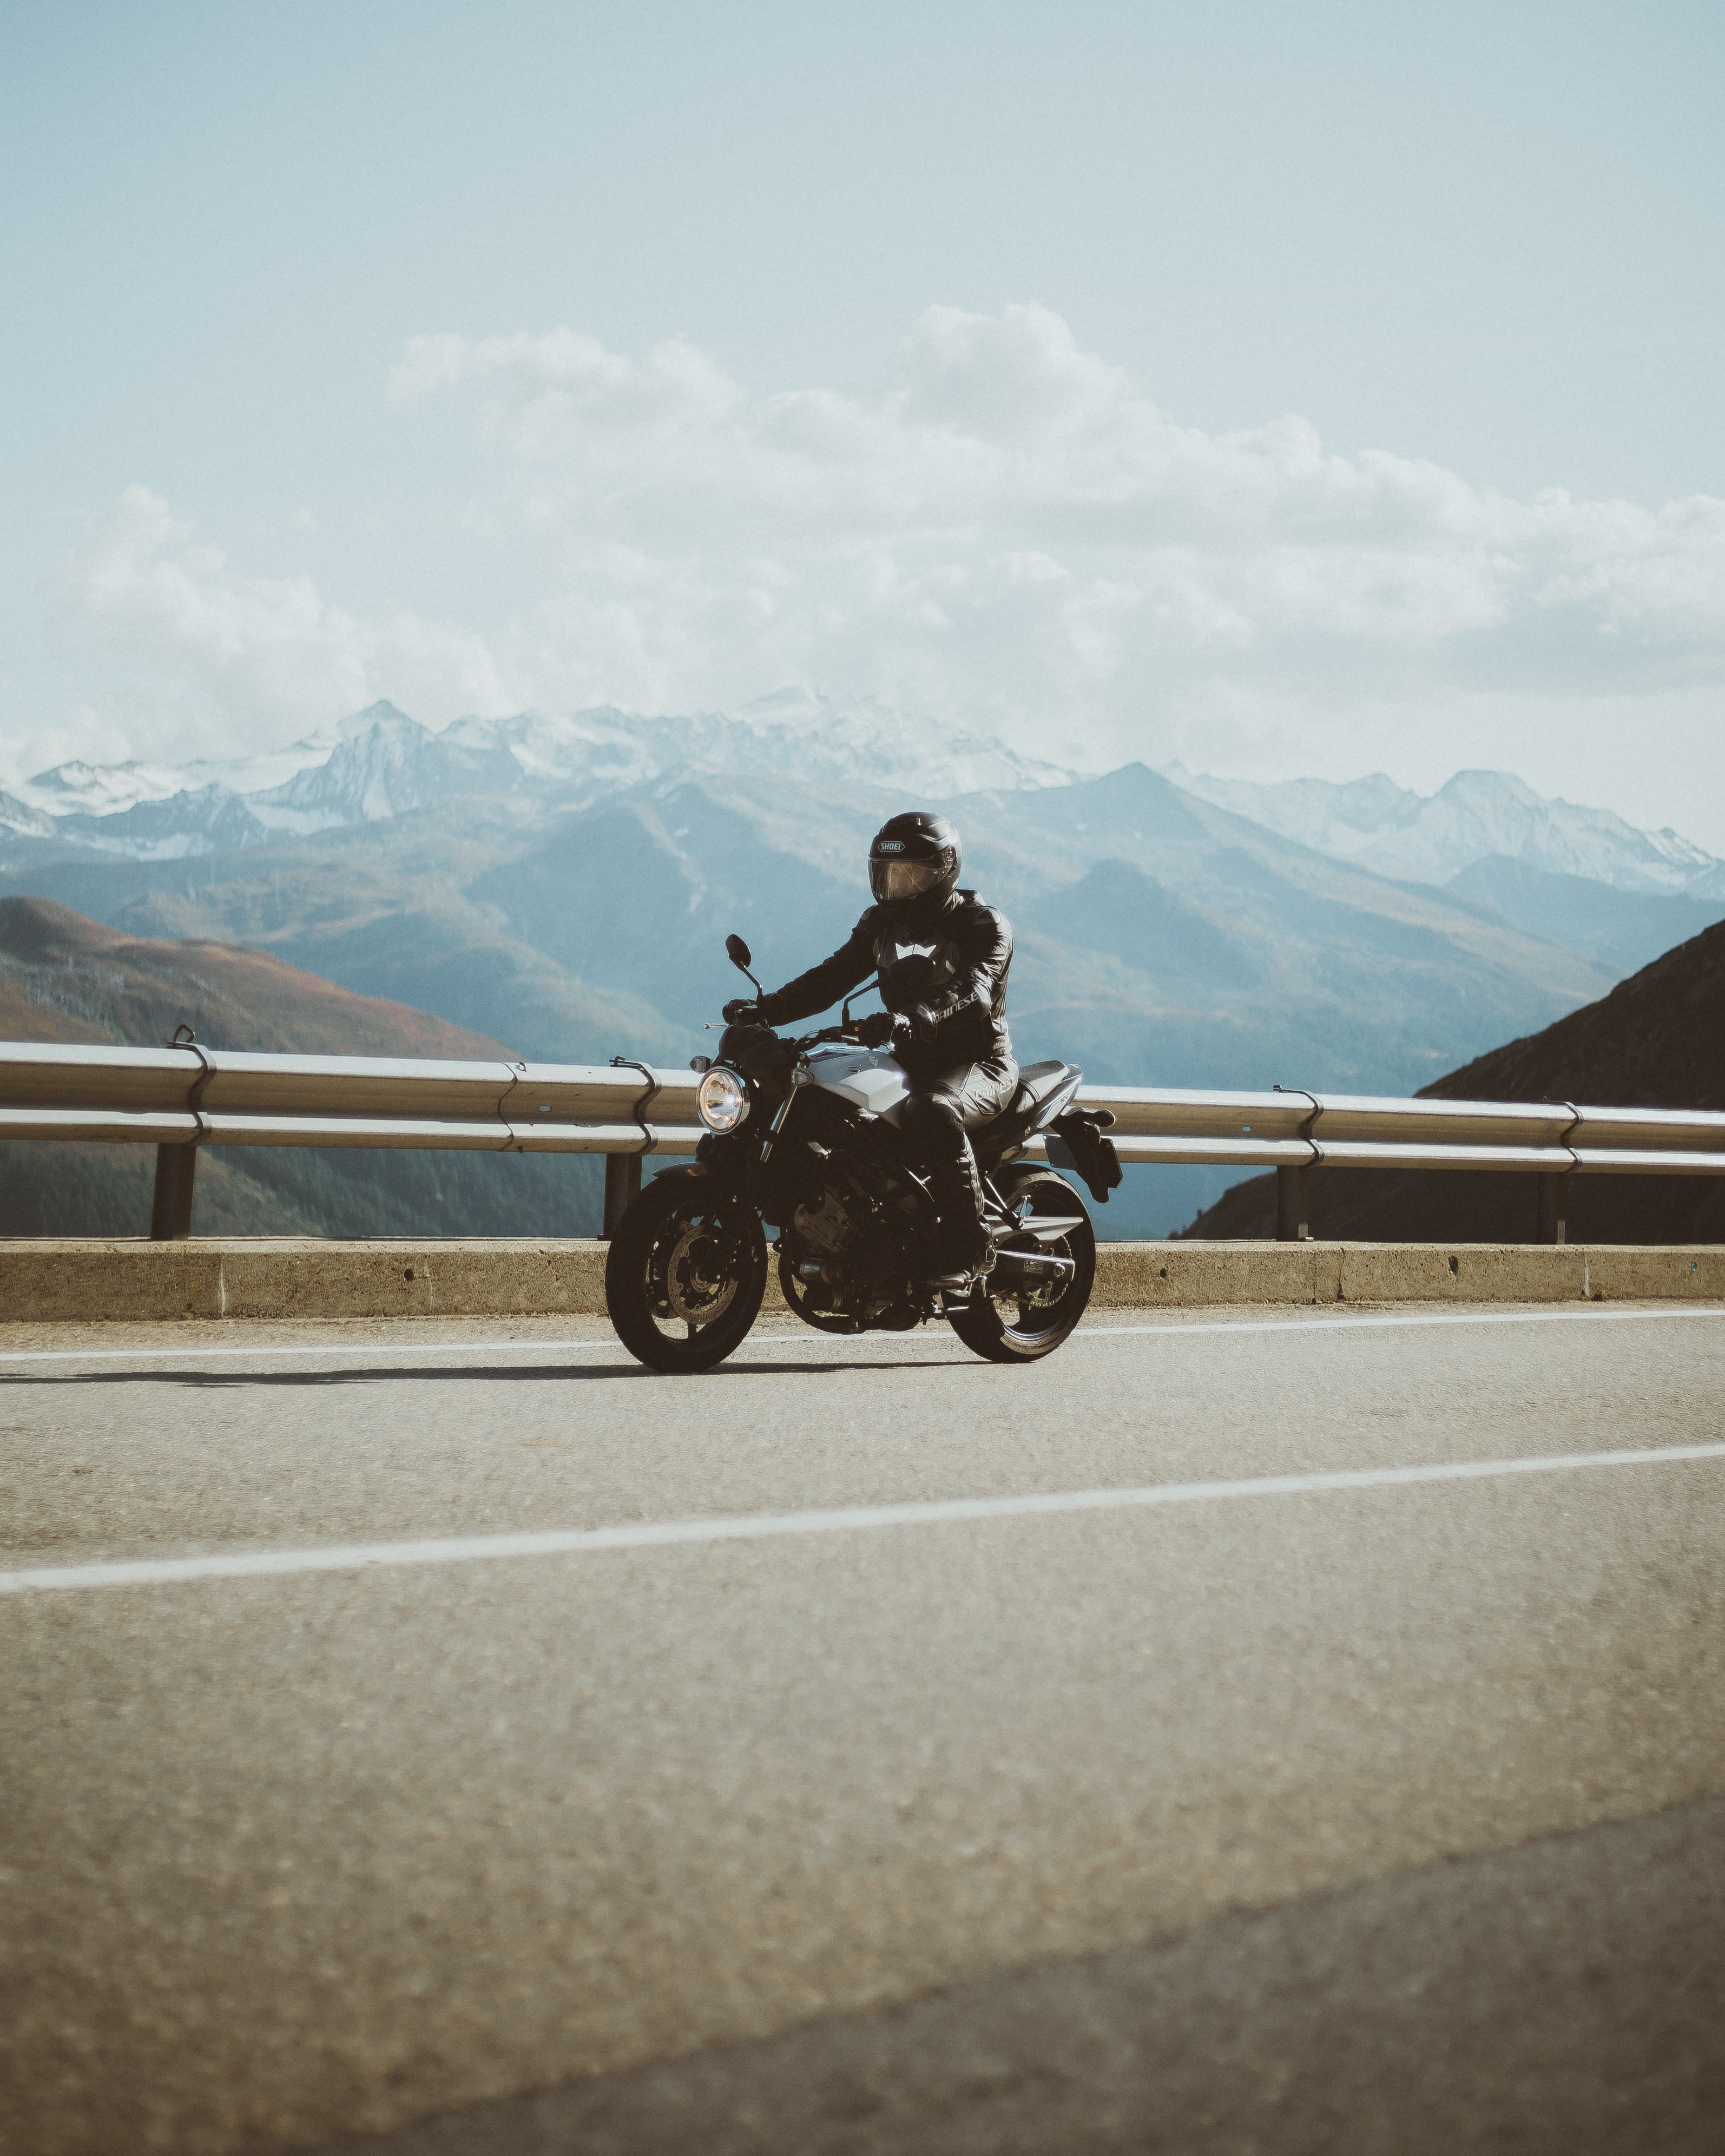 Popular Motorcyclist background images